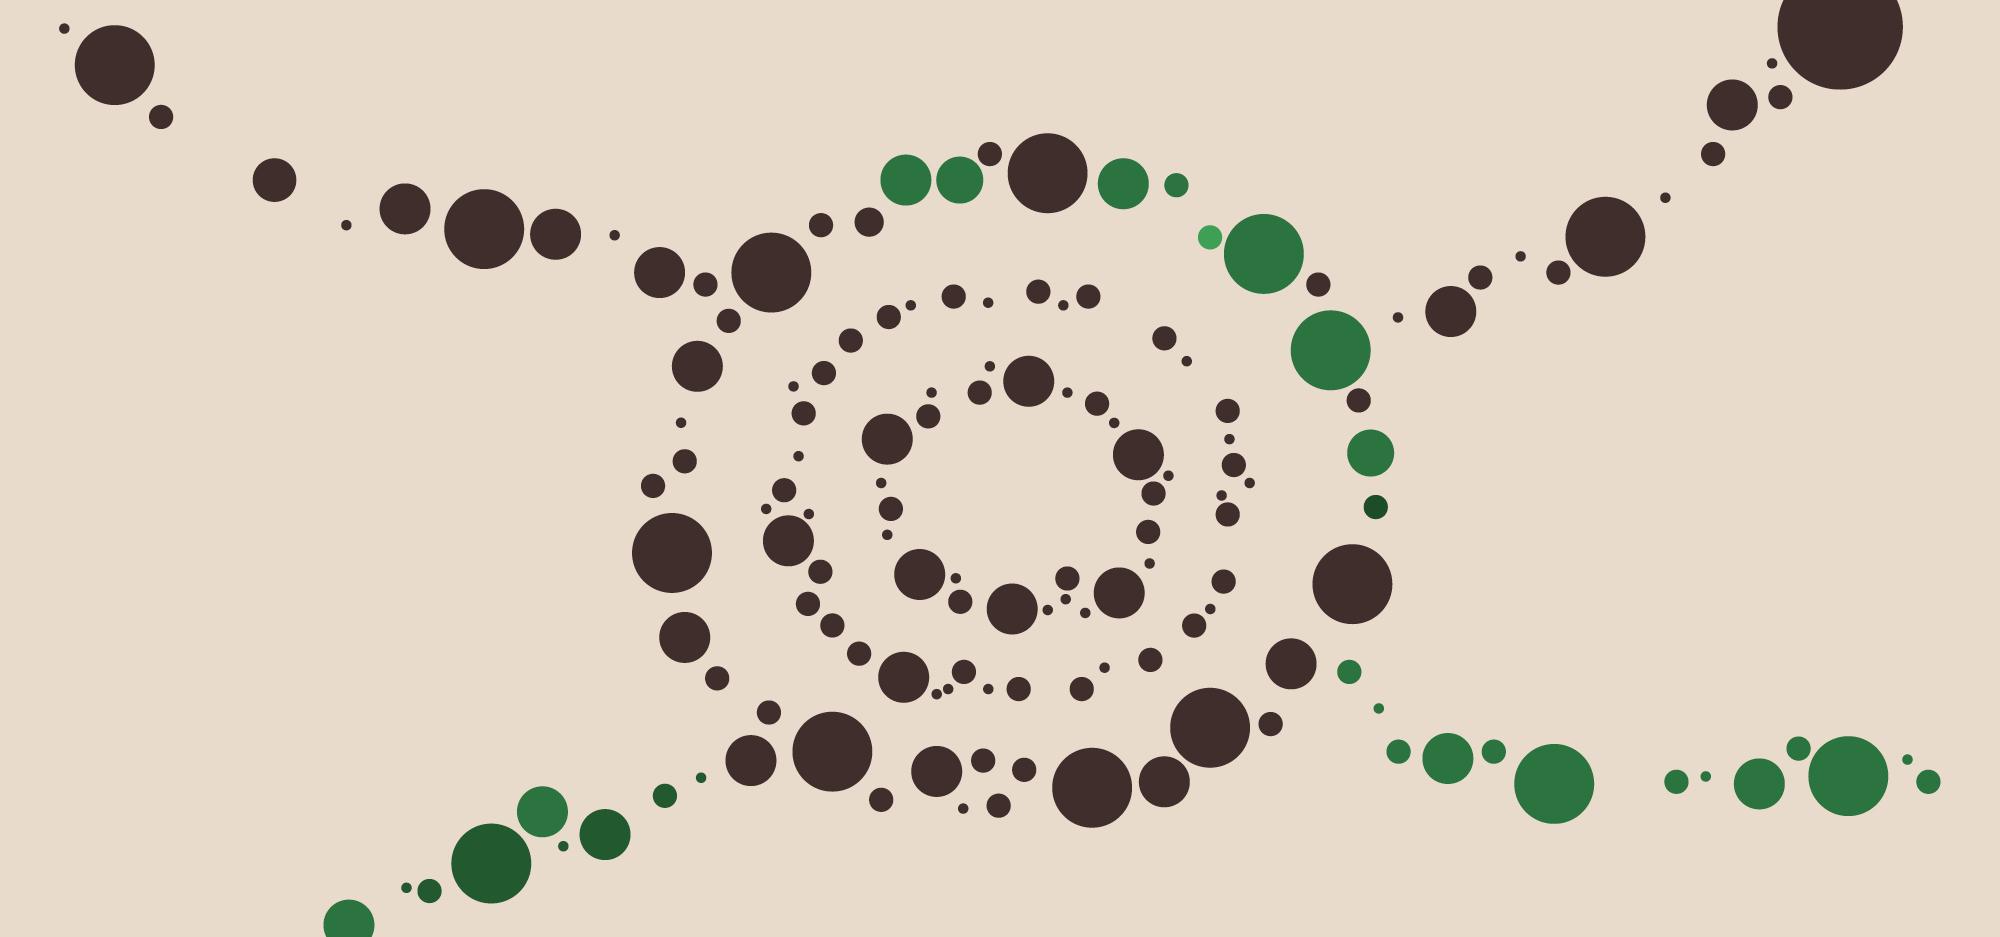 A series of brown and green dots that coalesce in the centre of a beige coloured canvas to form a series of concentric circles